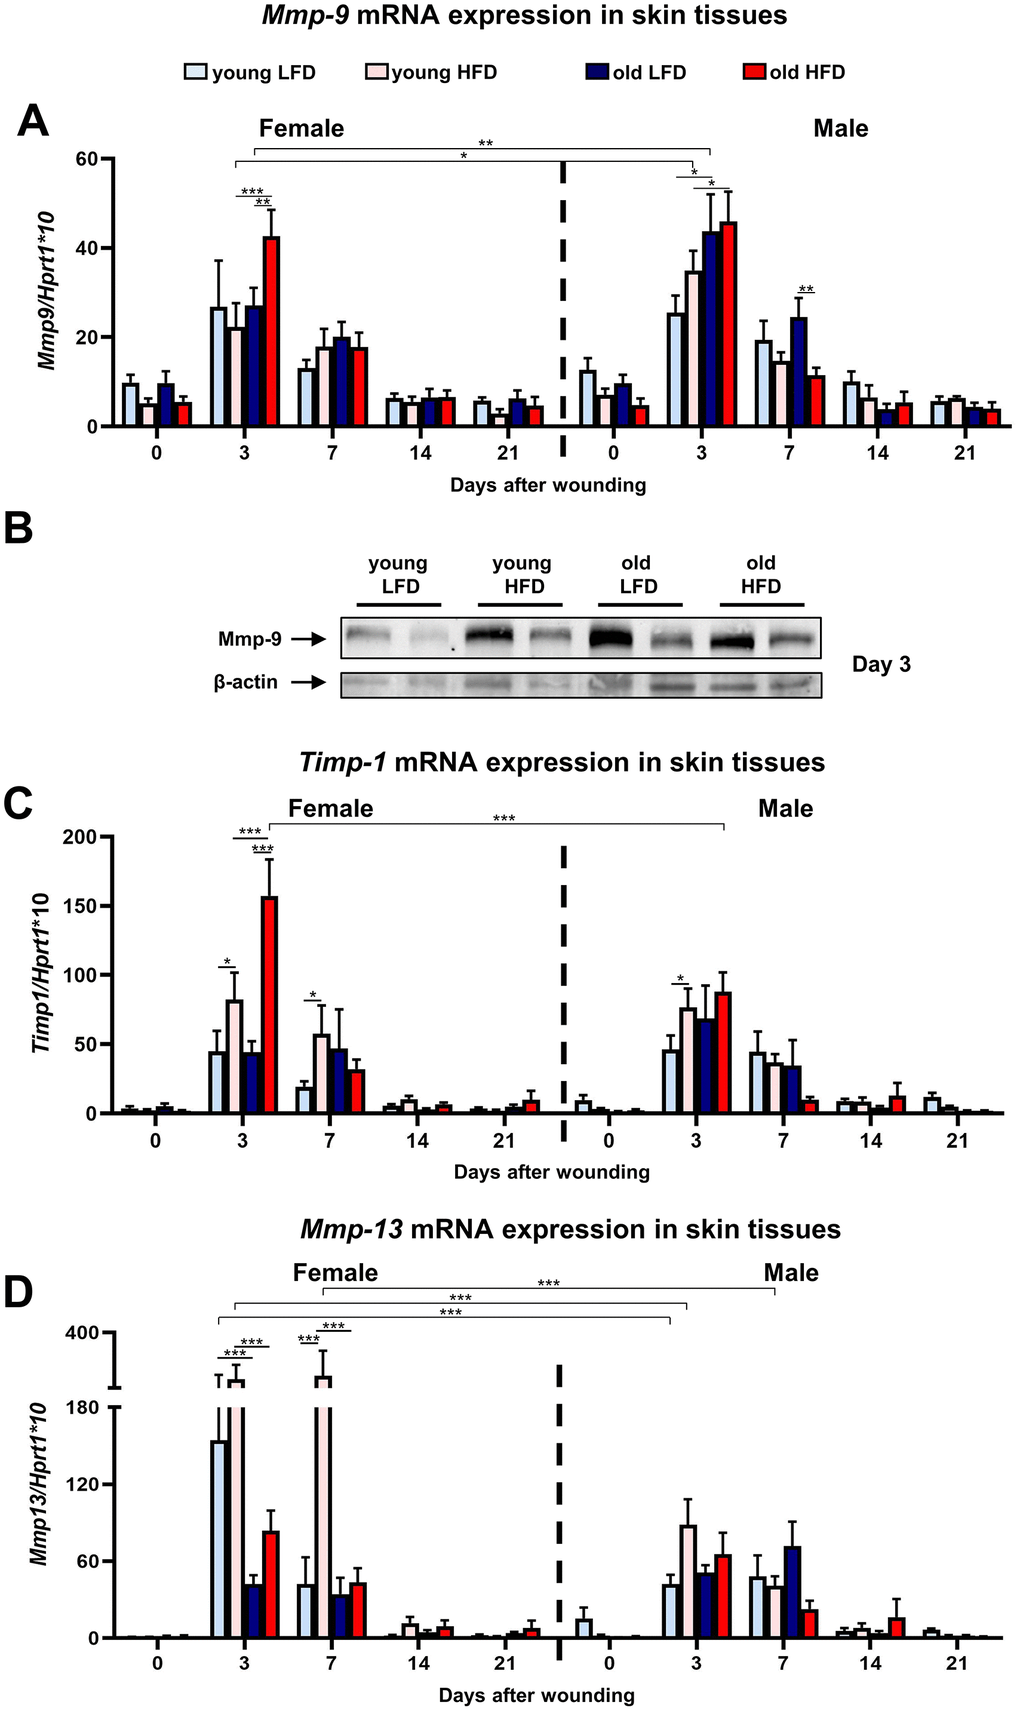 Matrix metalloproteinases and their tissue inhibitor expression during skin wound healing.Mmp-9 (A), Timp-1 (C) and Mmp-13 (D) qRT-PCR mRNA expression in uninjured and post-injured skin tissues collected from female, male, young, old, fed LFD or HFD mice (n=4-8 skin samples per group). Representative Western blot analysis of Mmp-9 protein expression at post-wounded day 3 (B). The bars indicate lsmean ±SE *p